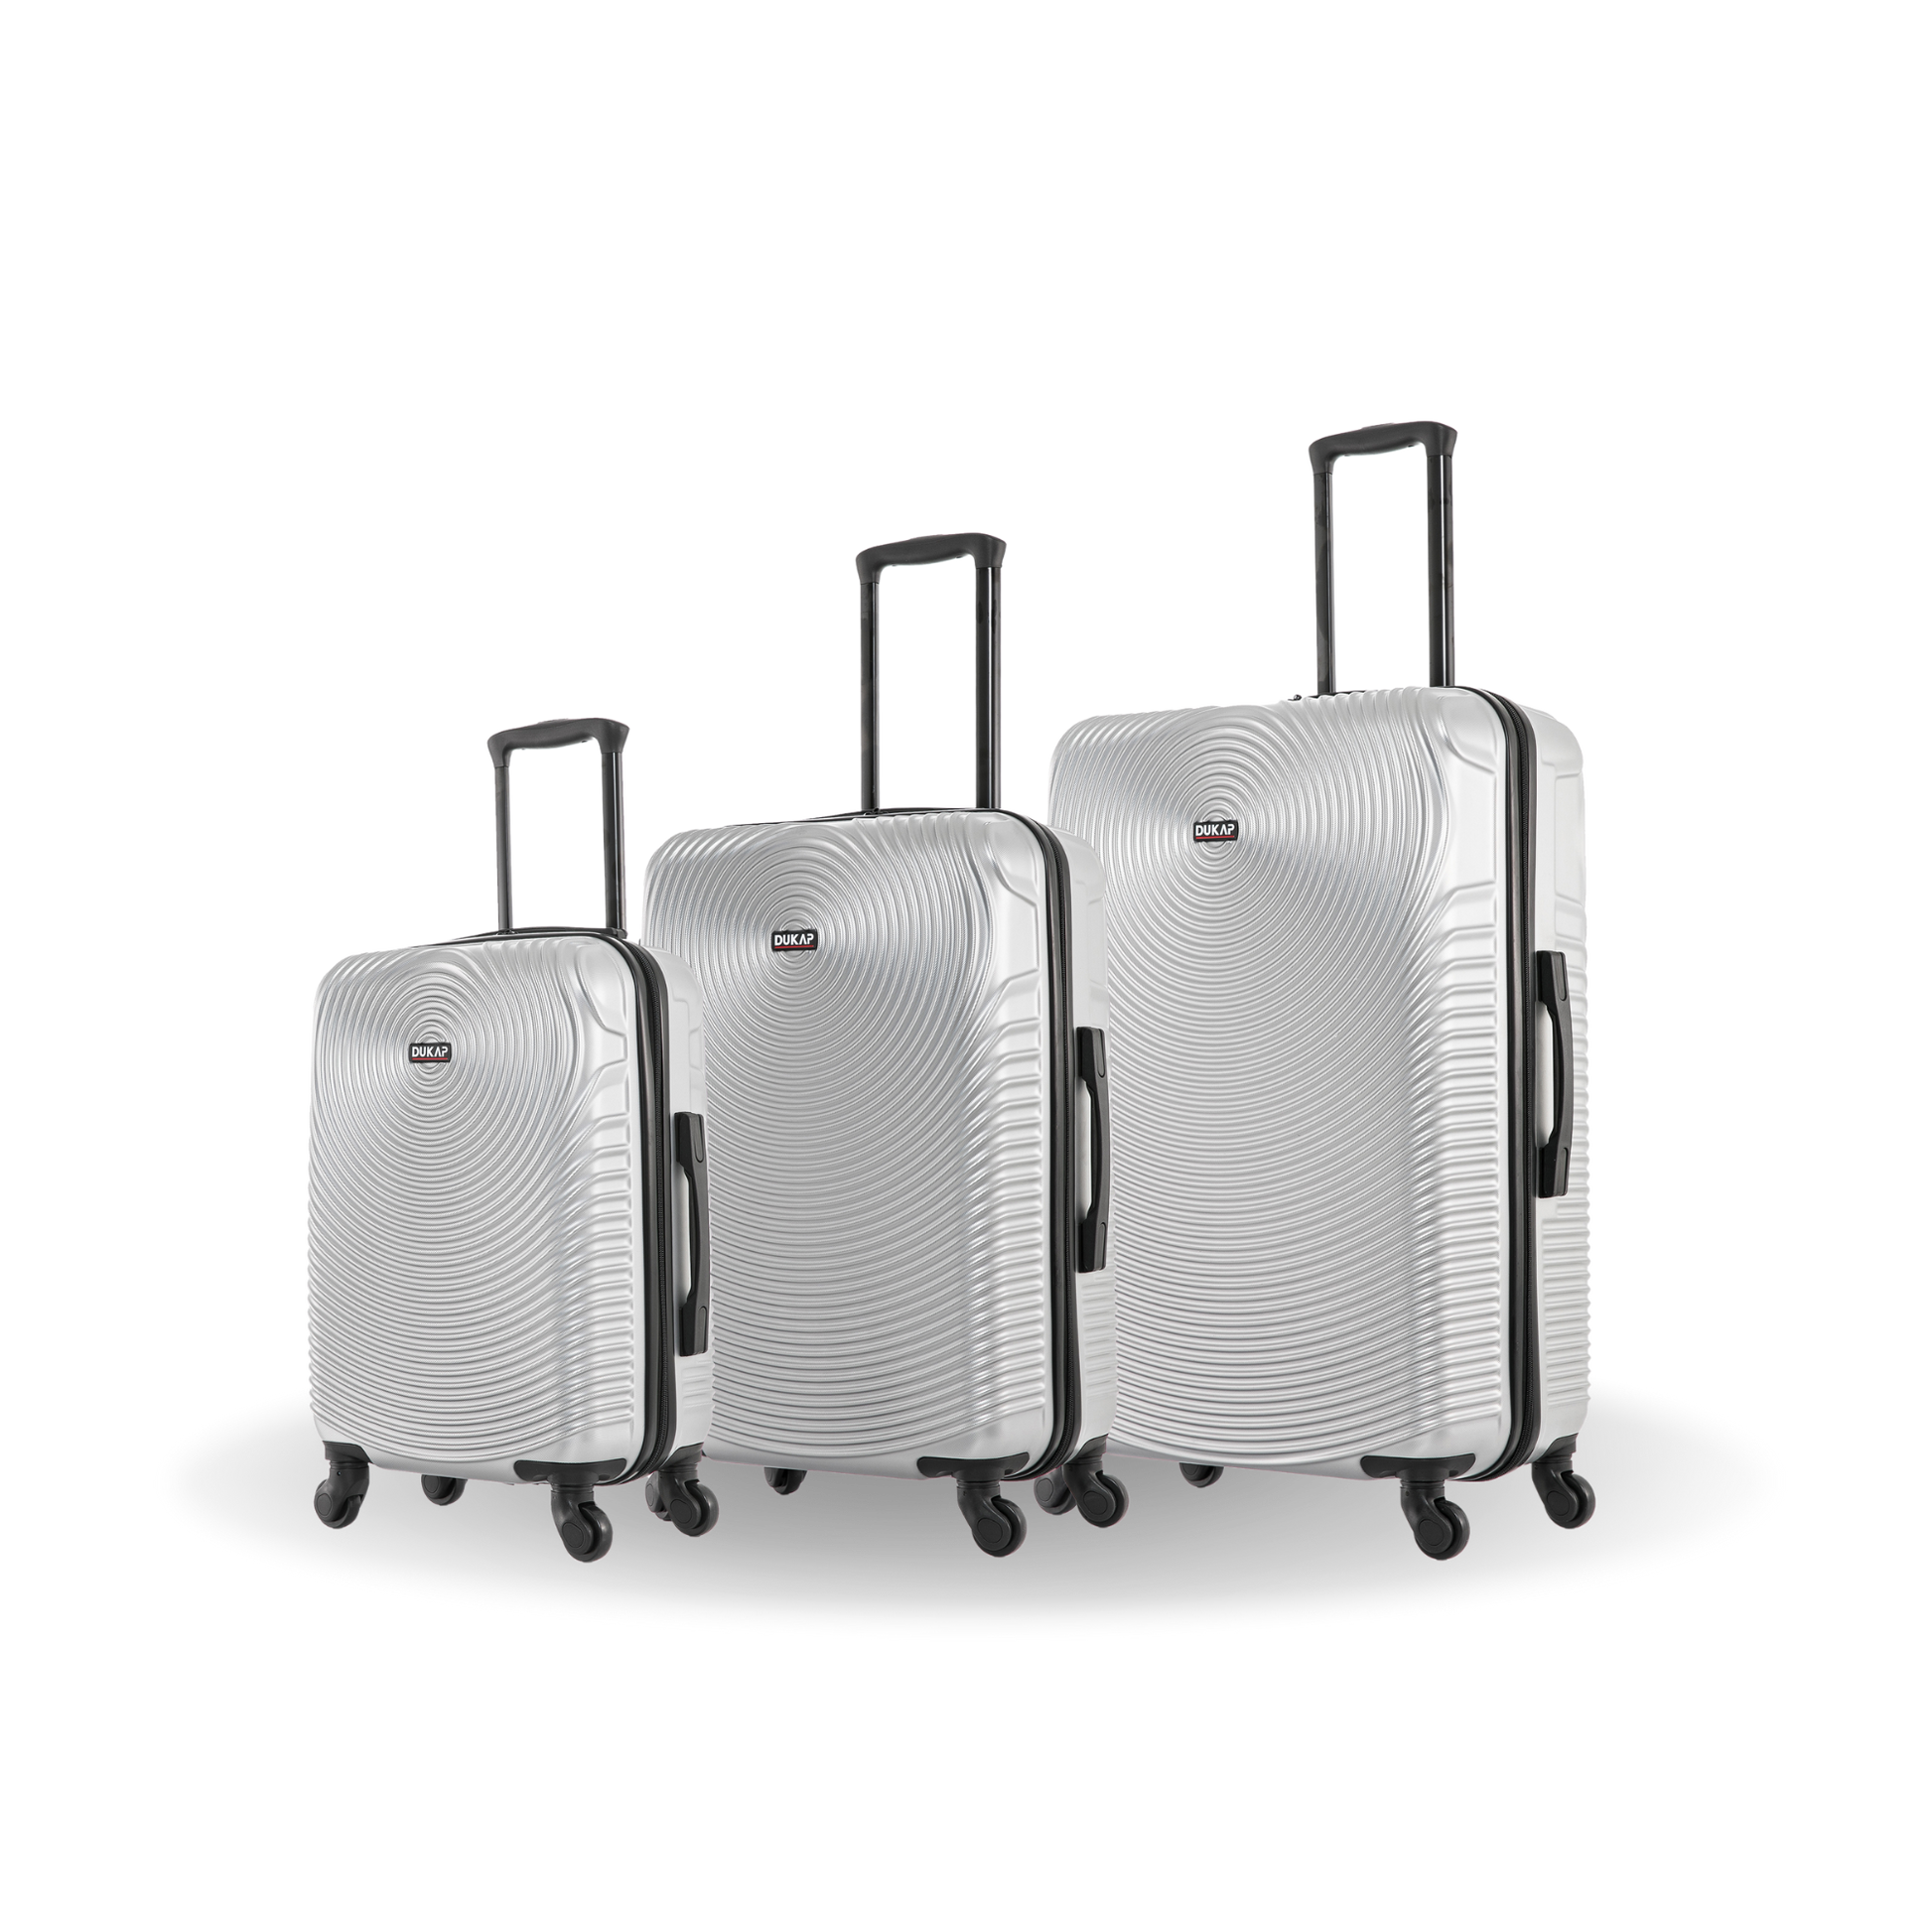 INCEPTION Hardside Spinner 3 Piece Luggage Set  20/28/32 Inches